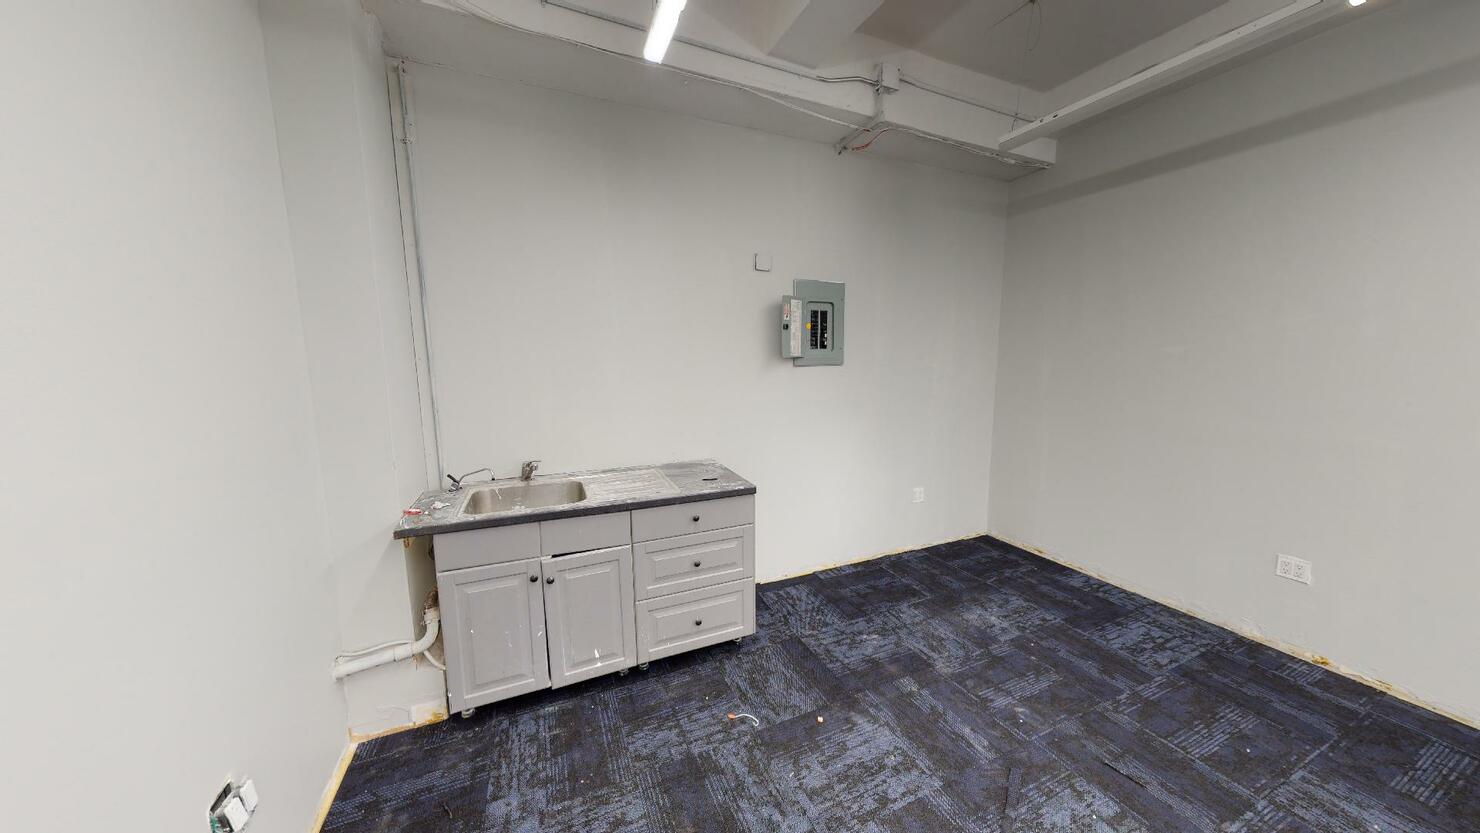 255 West 36th Street Office Space, 9th Floor - Kitchenette